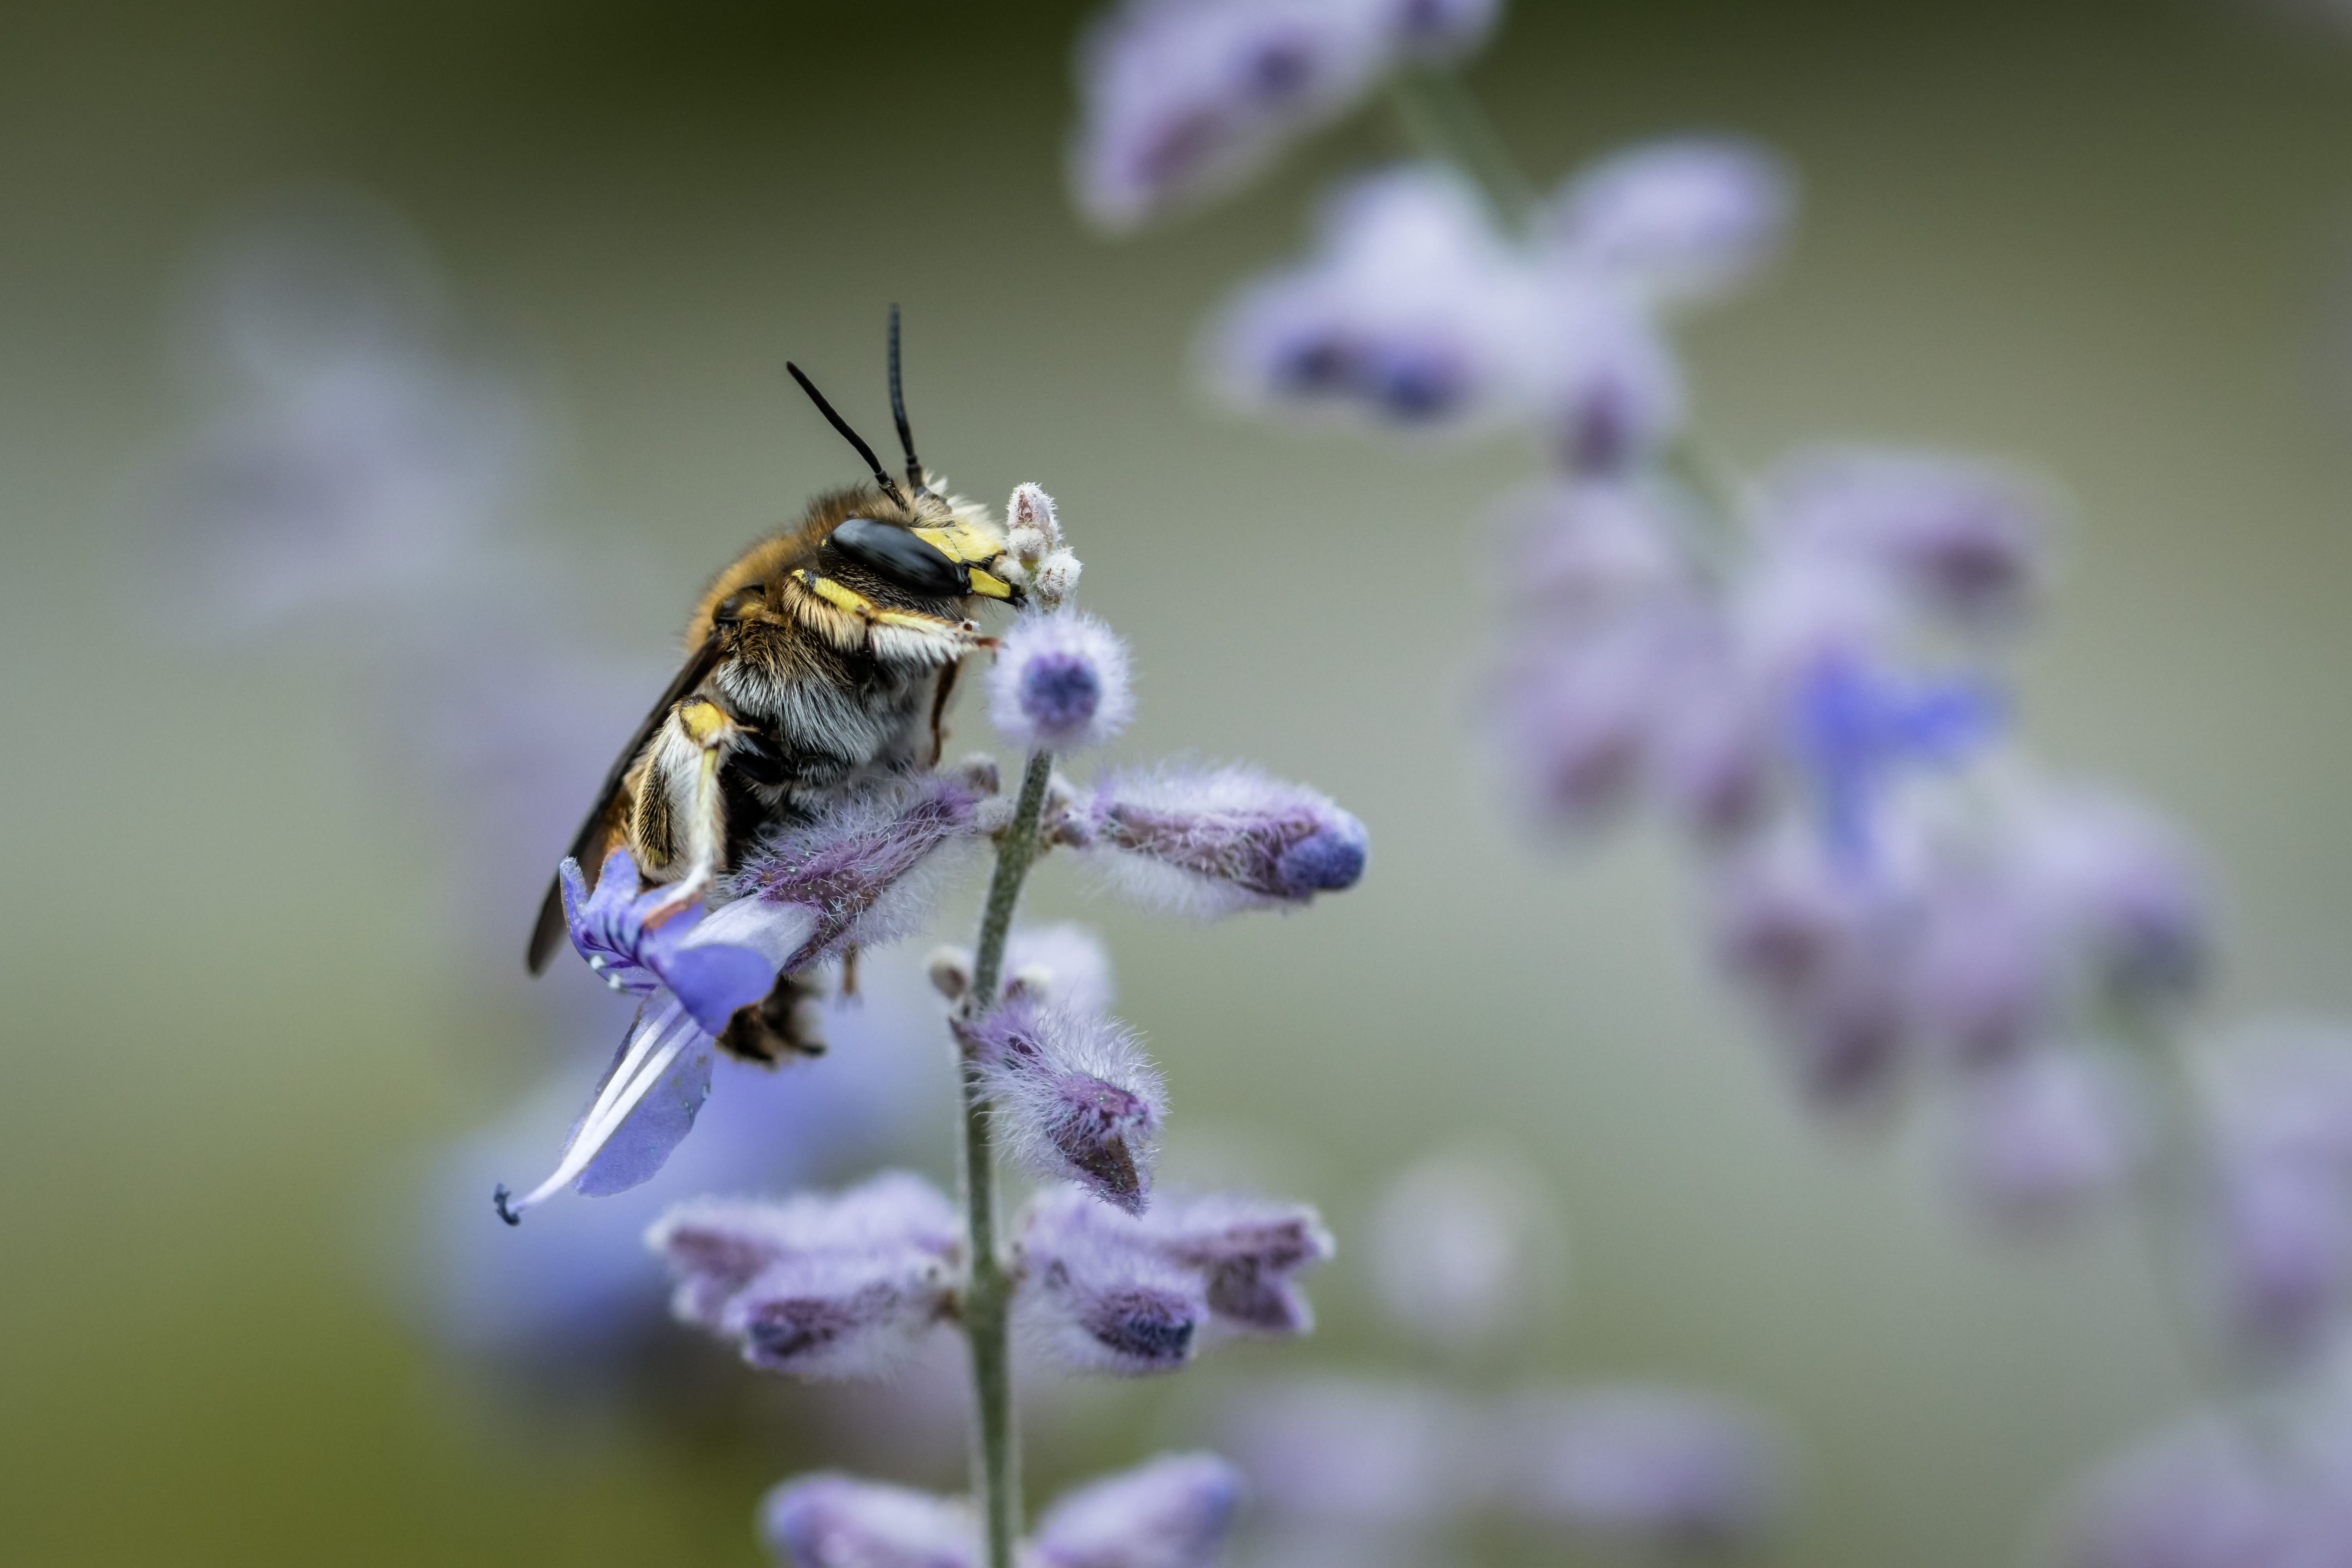 The value of pollinating insects for agriculture